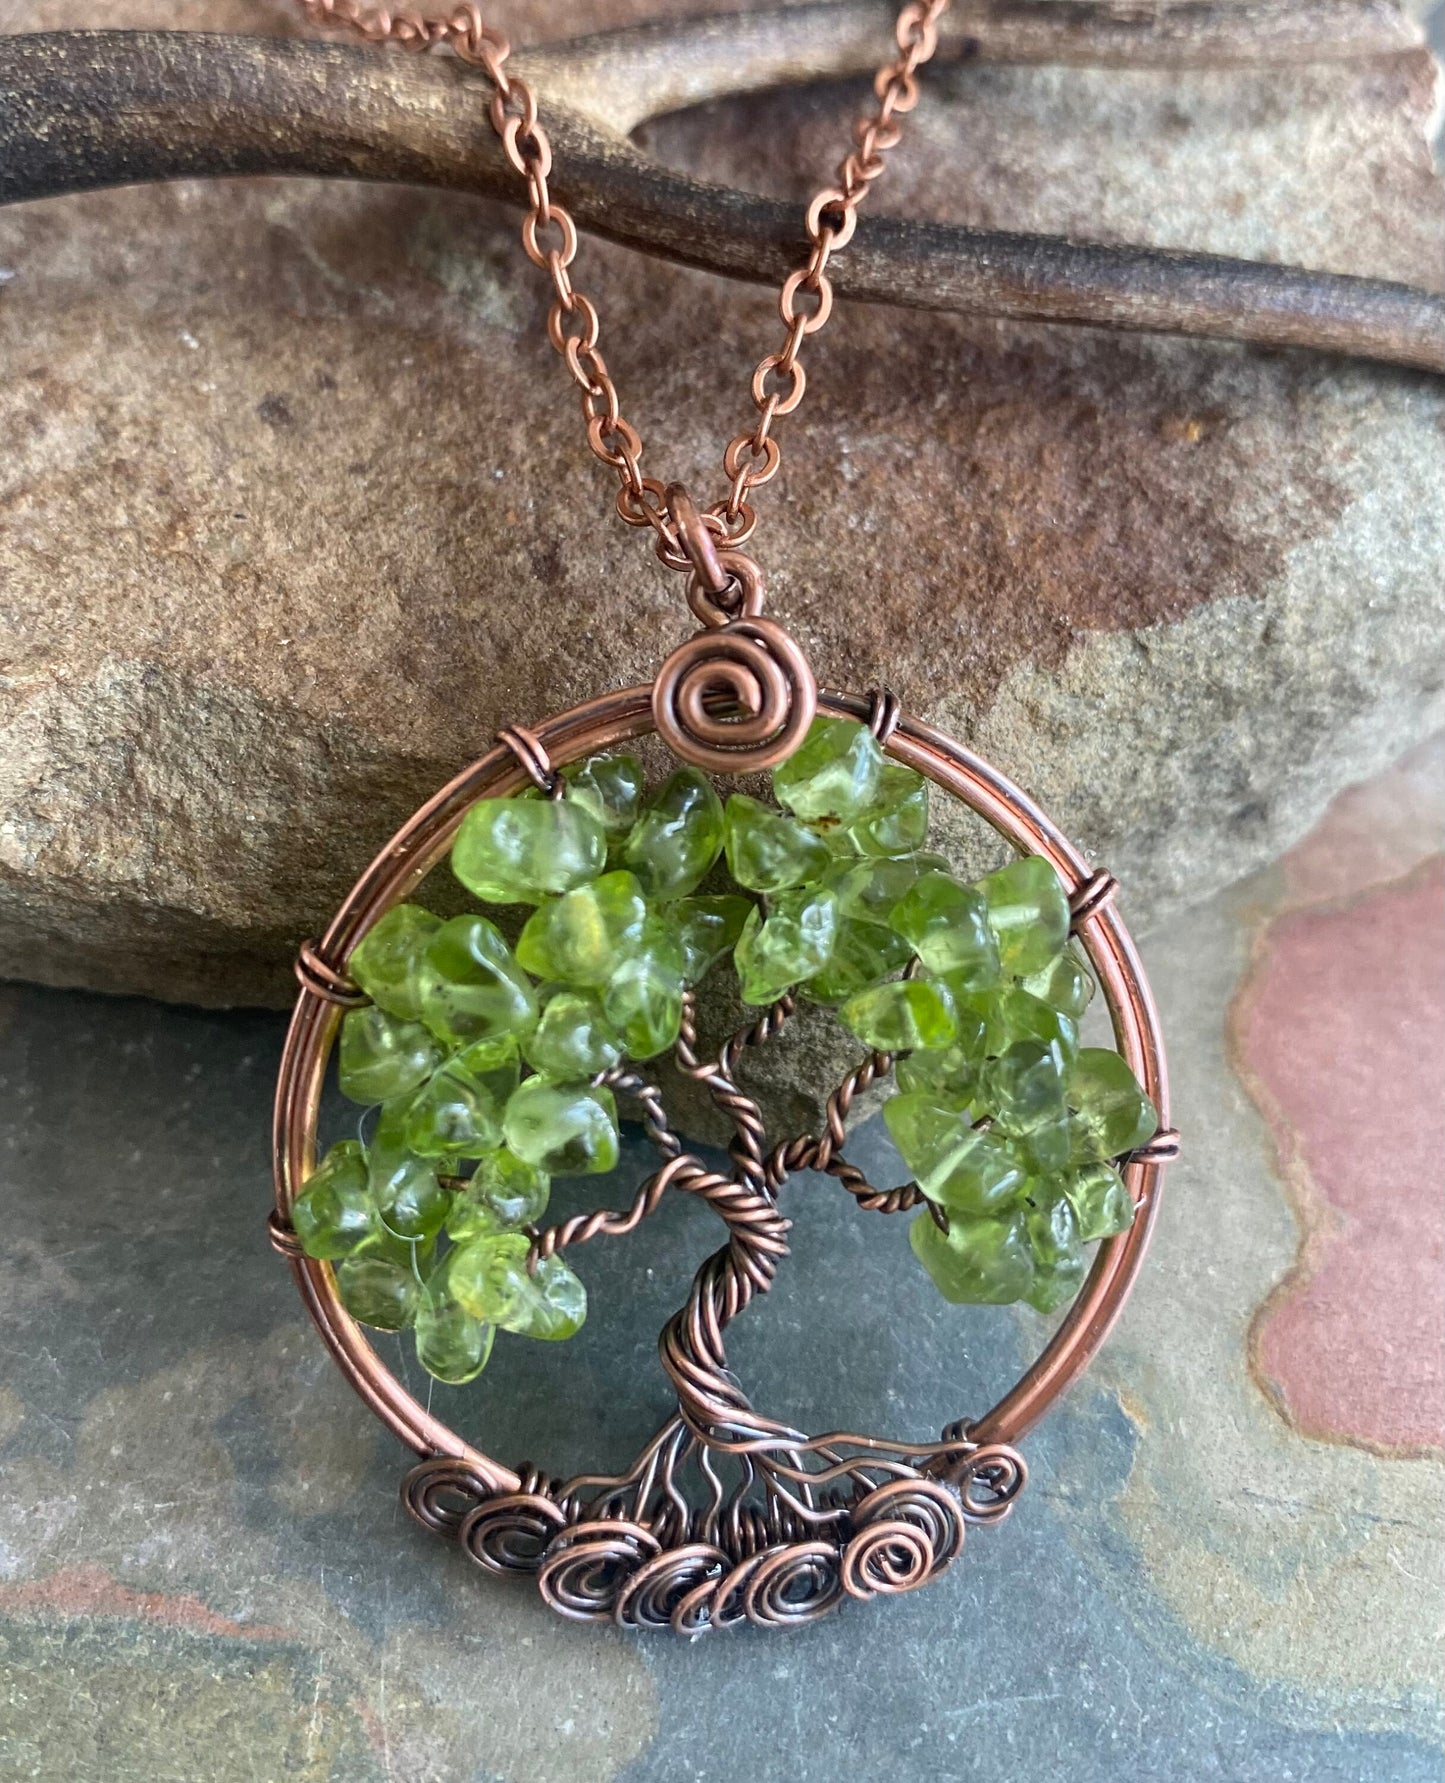 READY SHIP in 1 to 2 days, Peridot Tree of Life Pendant Antiqued Copper,Wire Wrapped Peridot Tree of life Necklace,August Birthstone Peridot